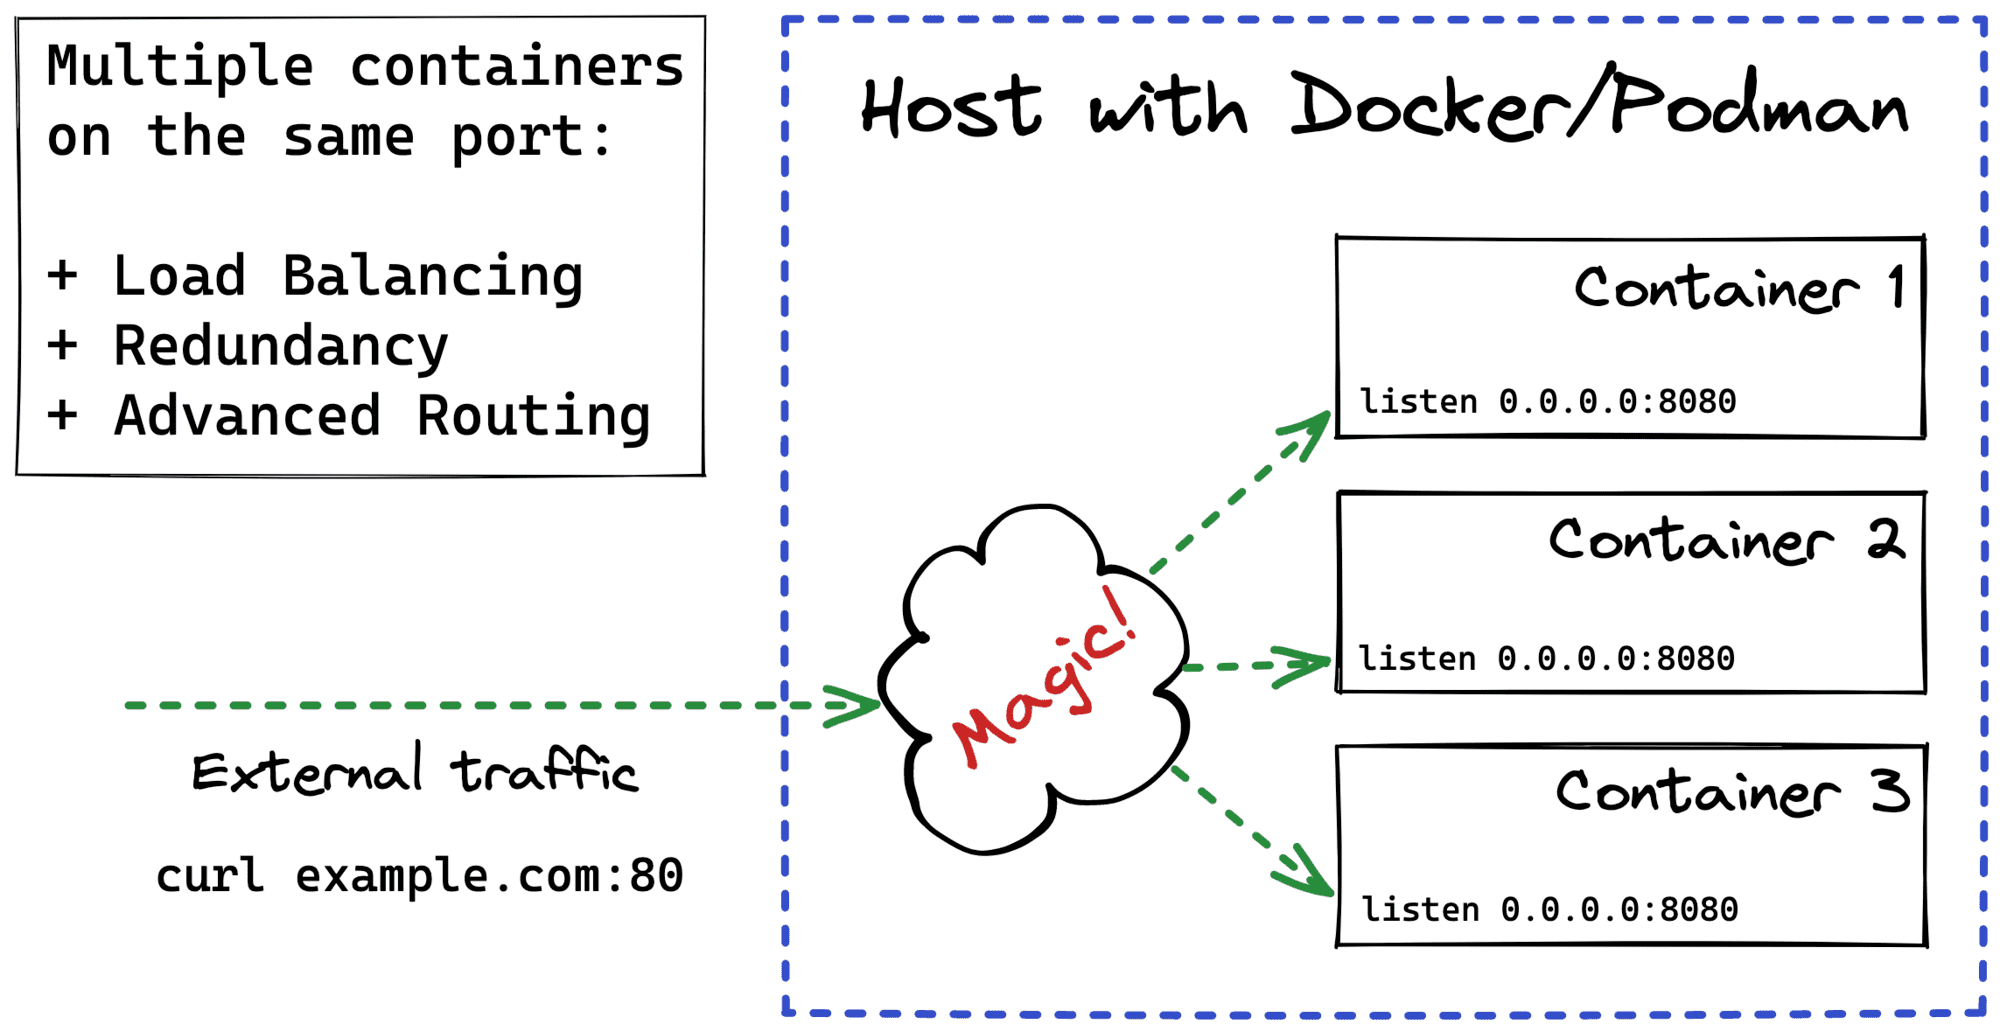 Benefits of exposing multiple Docker containers on the same port